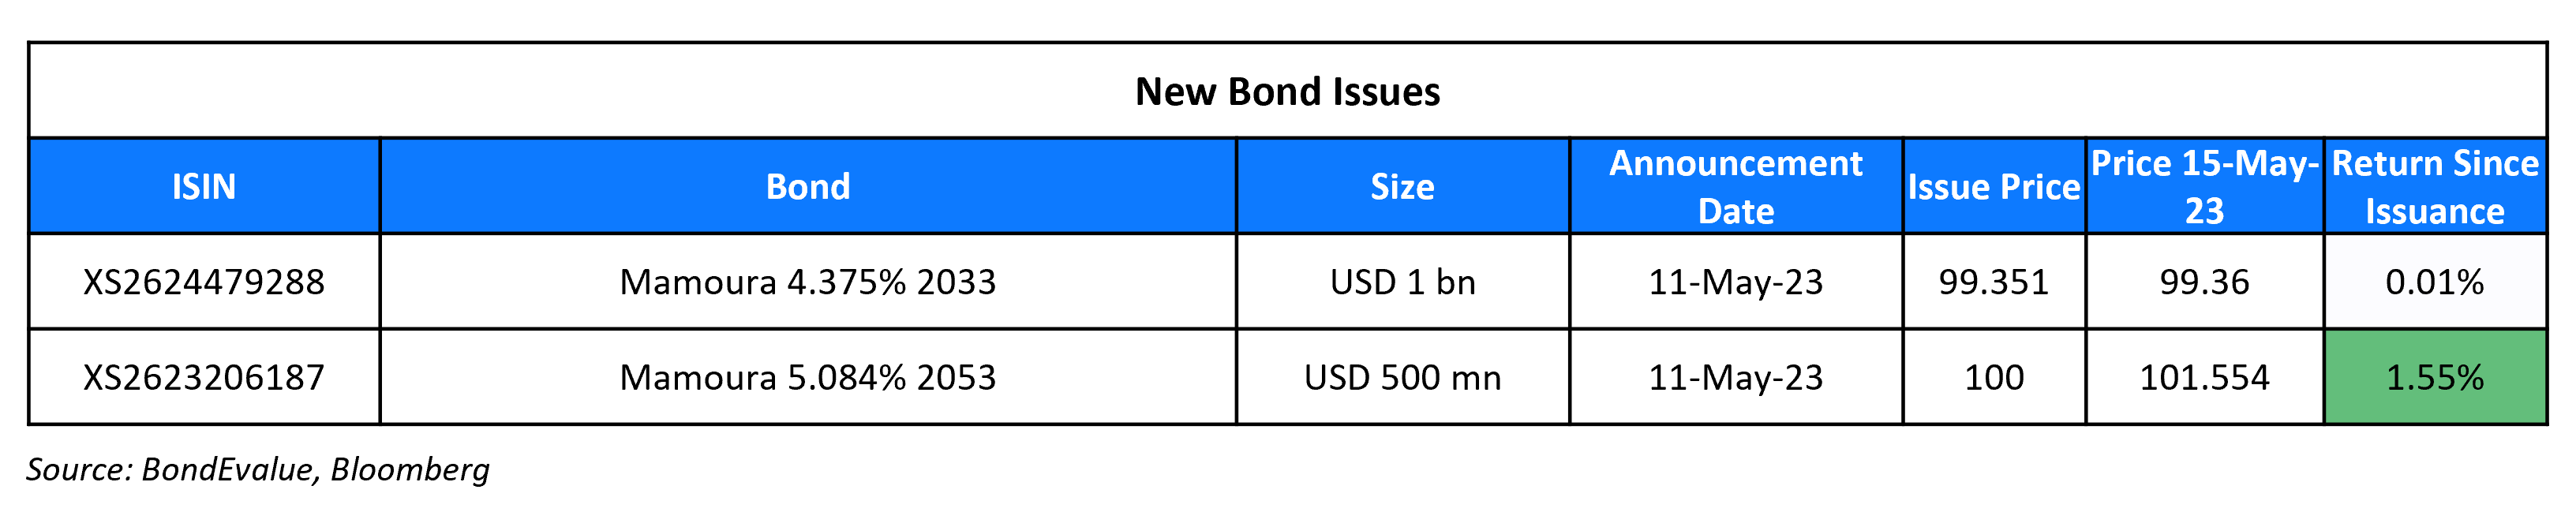 New Bond Issues 15 May 23